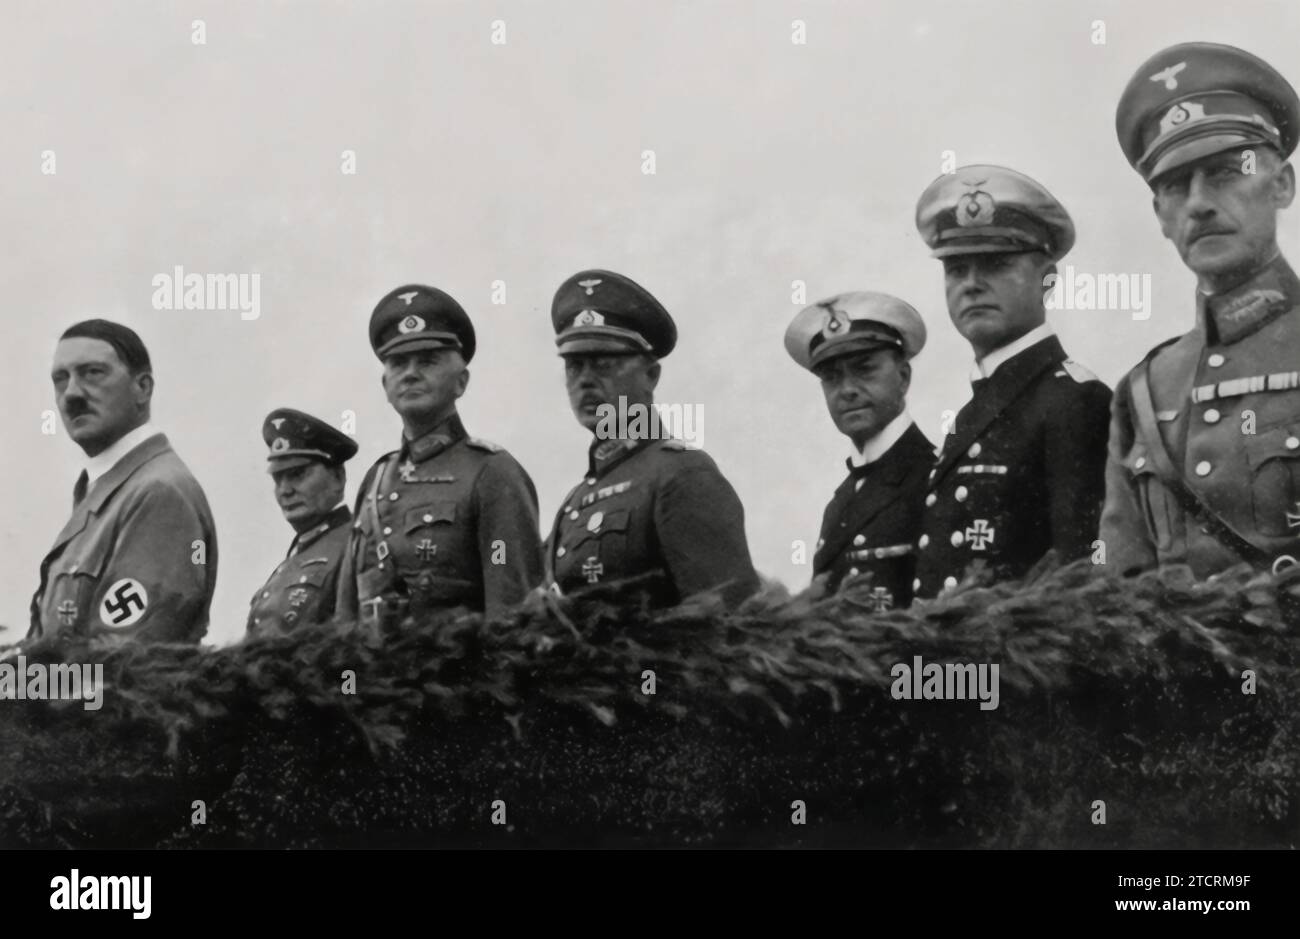 On the Day of the Armed Forces in 1935, Adolf Hitler is pictured with his top commanders, showcasing the hierarchy of military leadership in Nazi Germany. From left to right: Generaloberst Hermann Göring, Commander-in-Chief of the Luftwaffe; Generalfeldmarschall Werner von Blomberg, Minister of War; Generaloberst Freiherr von Fritsch, Commander-in-Chief of the Army; and Generaladmiral Dr. h.c. Erich Raeder, Commander-in-Chief of the Kriegsmarine. This gathering illustrates the consolidation of military power and the diverse branches under Hitler's command. Stock Photo